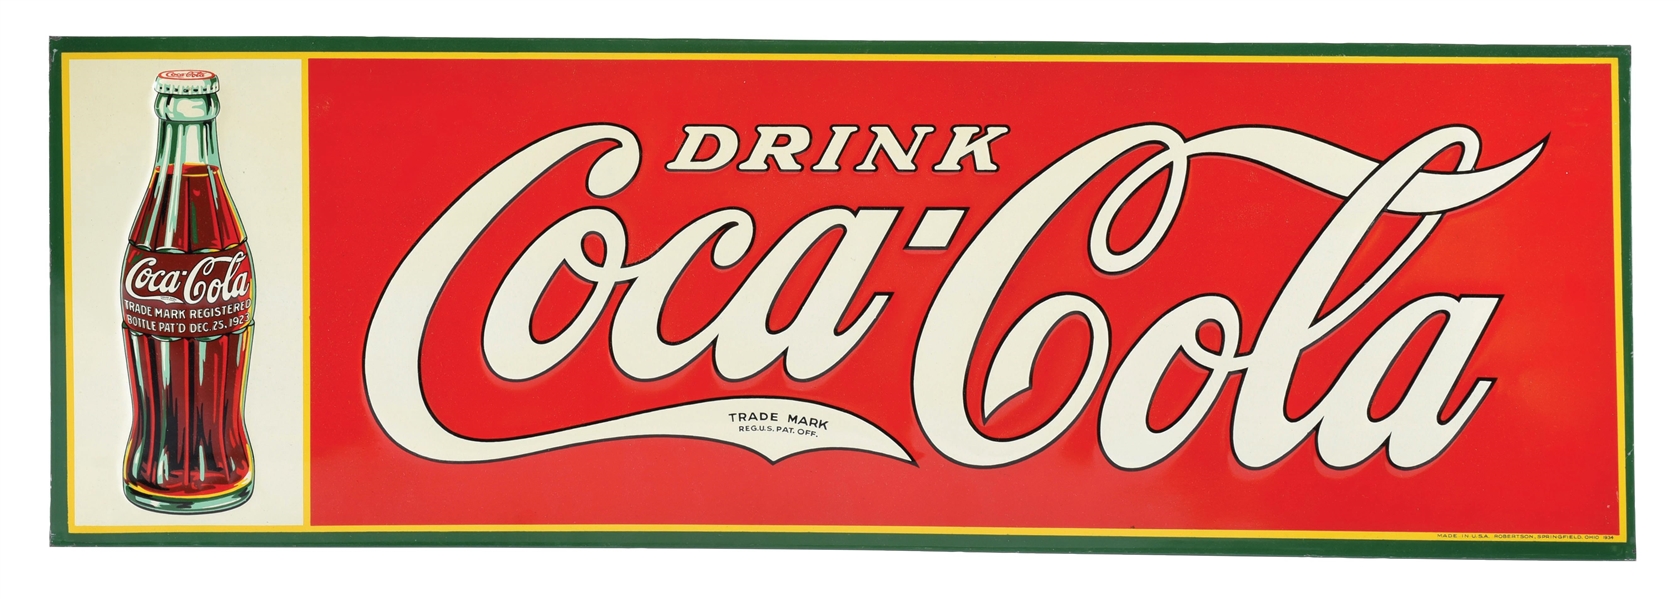 OUTSTANDING DRINK COCA COLA EMBOSSED TIN SIGN W/ CHRISTMAS BOTTLE GRAPHIC. 